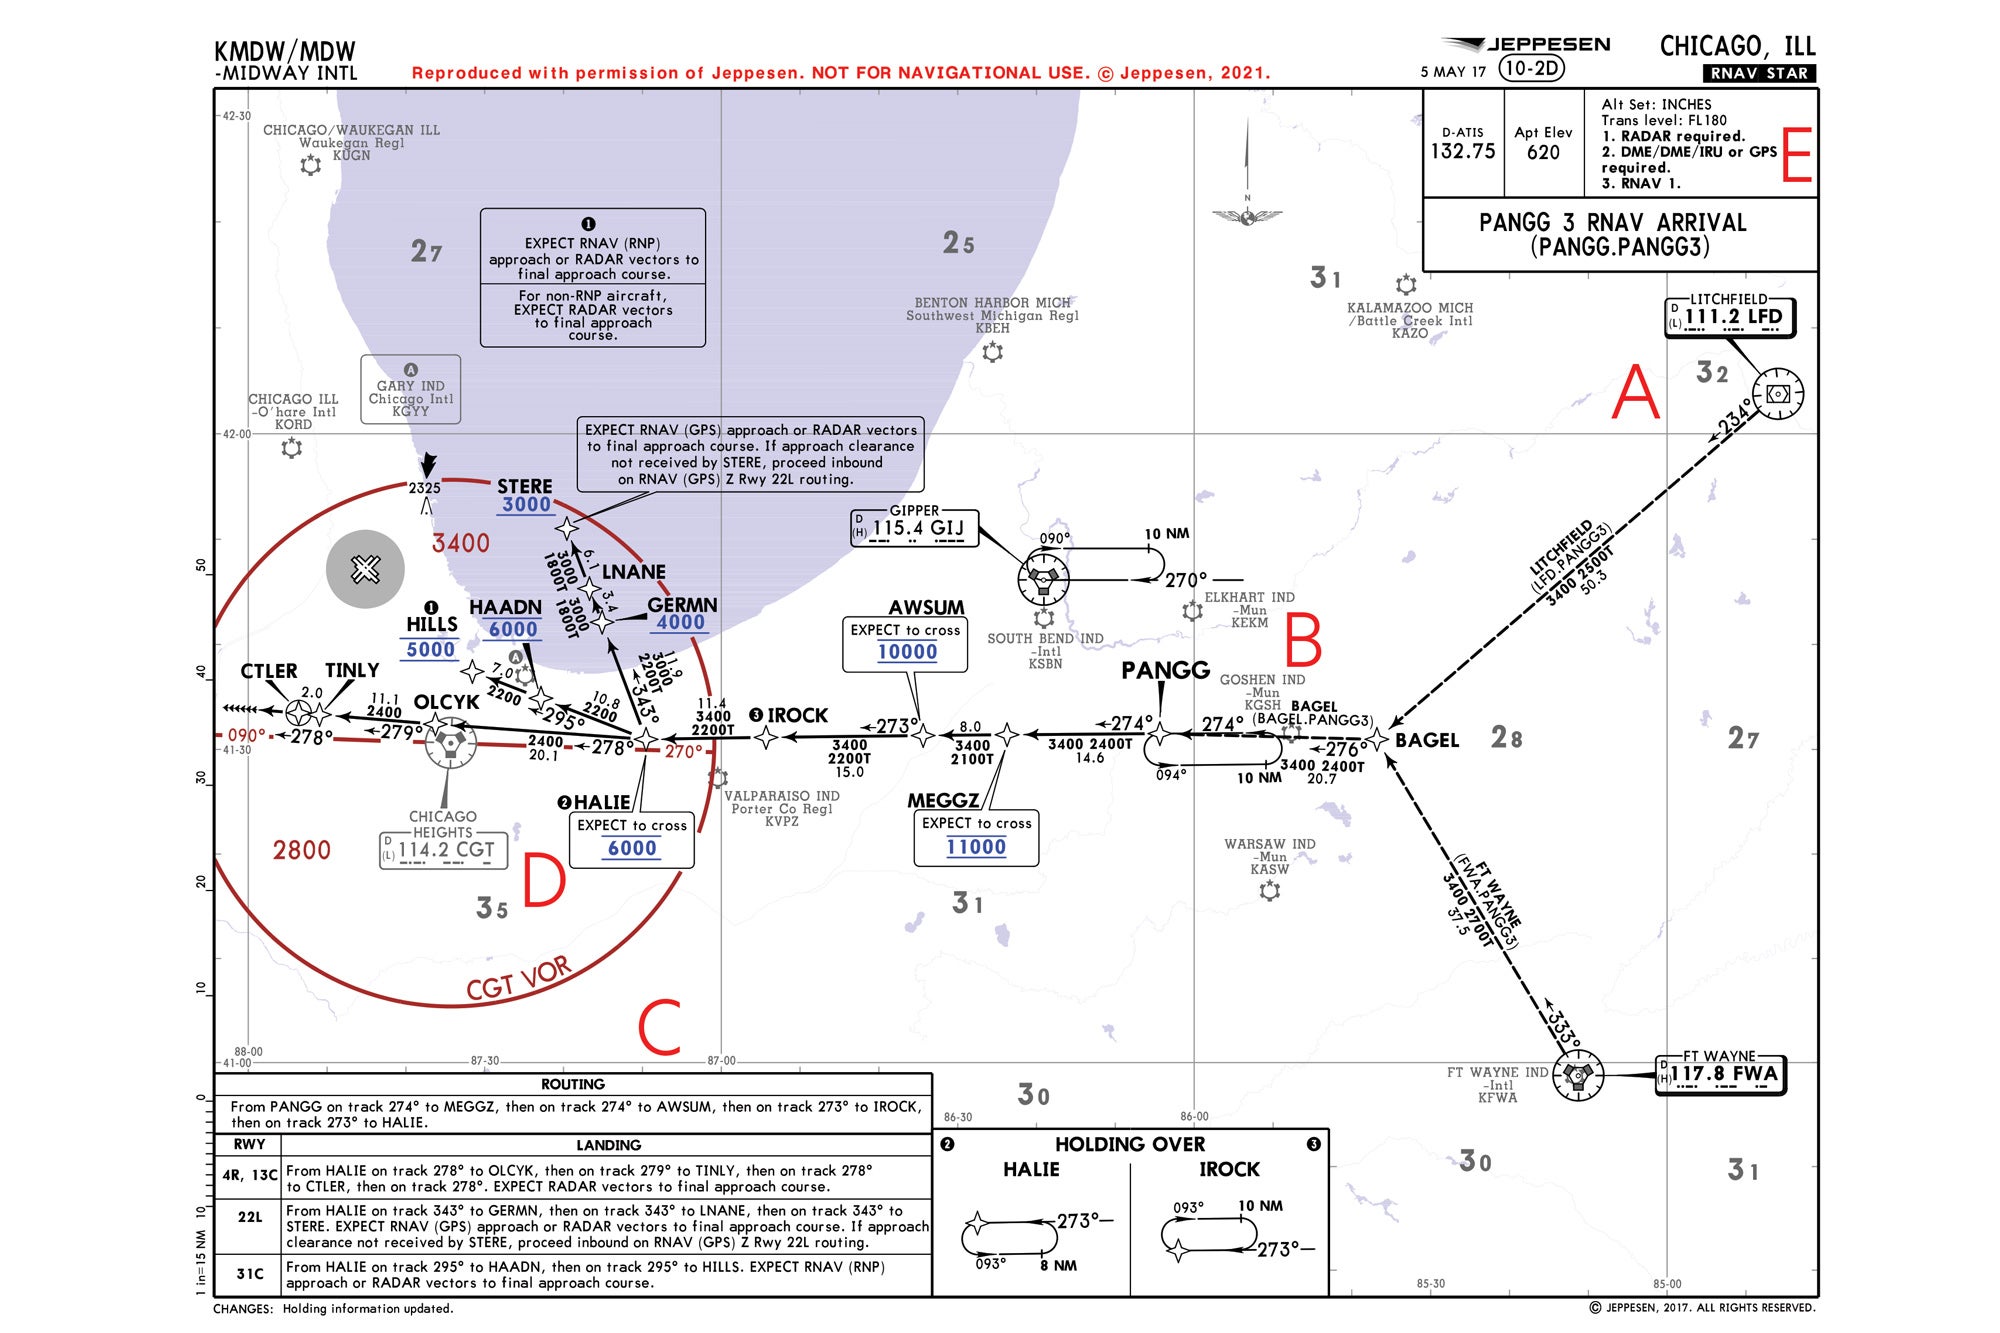 Chicago Midway KMDW PANGG3 (RNAV) Arrival